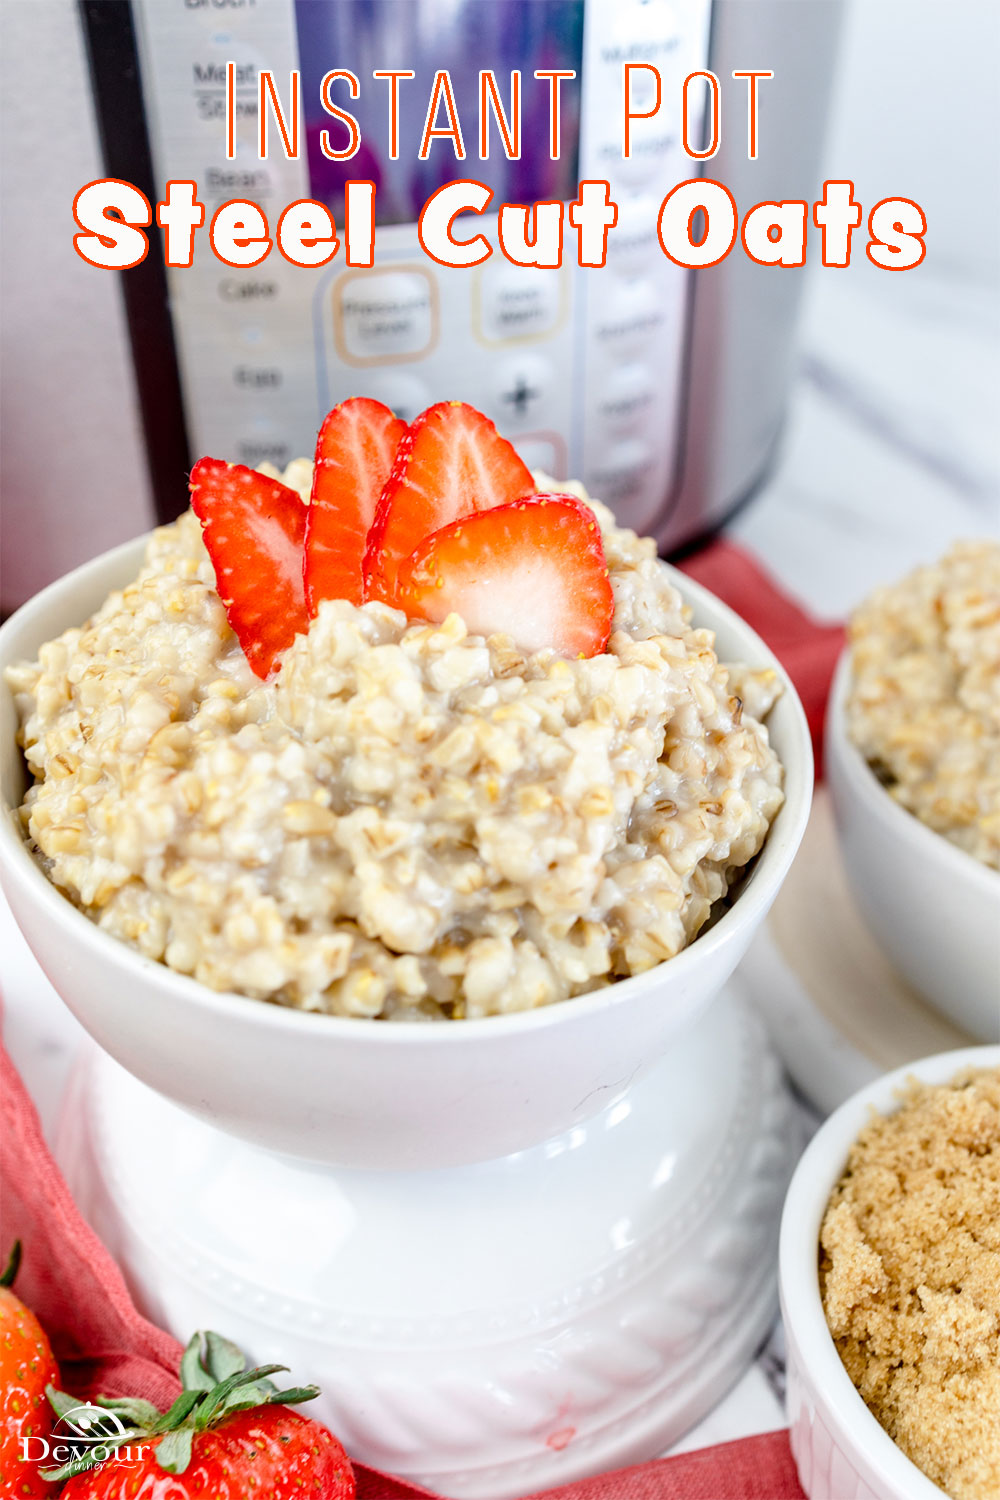 Instant Pot Steel Cut Oats is a hearty and delicious breakfast option, and it's great for meal prep too! Ready in less than 30 minutes, it's a great healthy breakfast idea, served with fresh fruit on top!